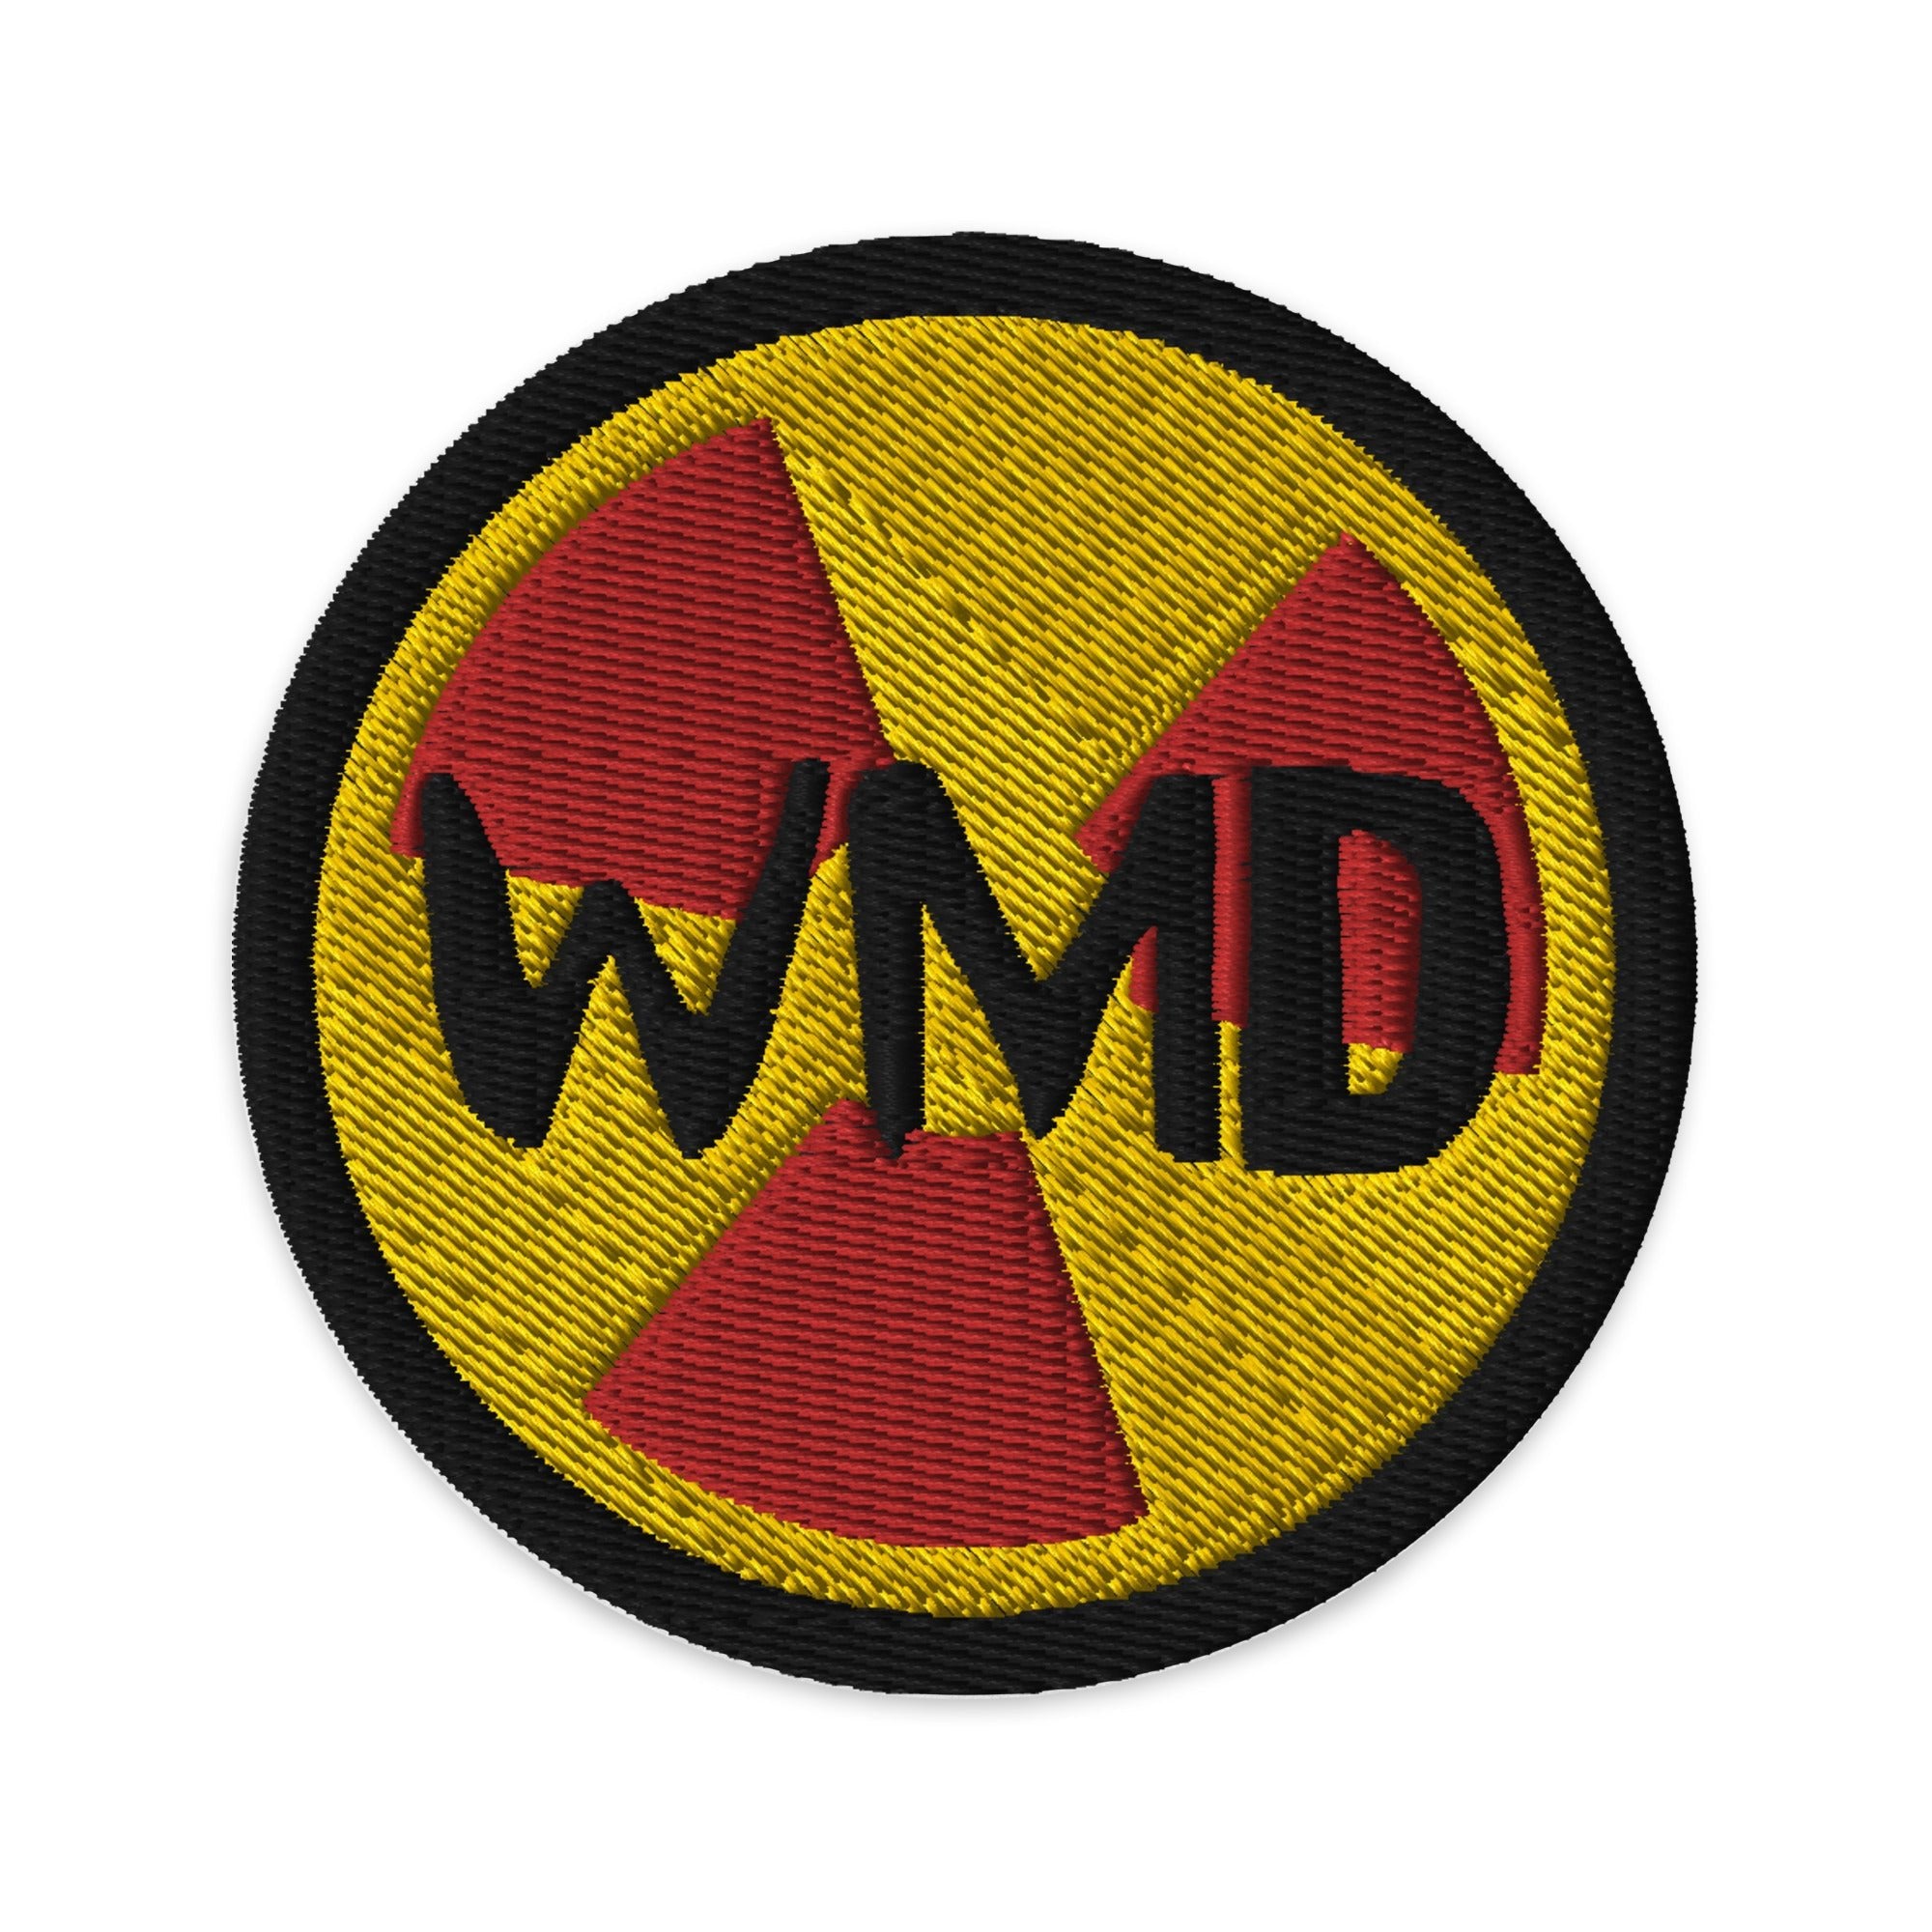 WMD - Embroidered Patch - WMD Geiger Counter Embroidered Patch - WMD - geiger - logo -